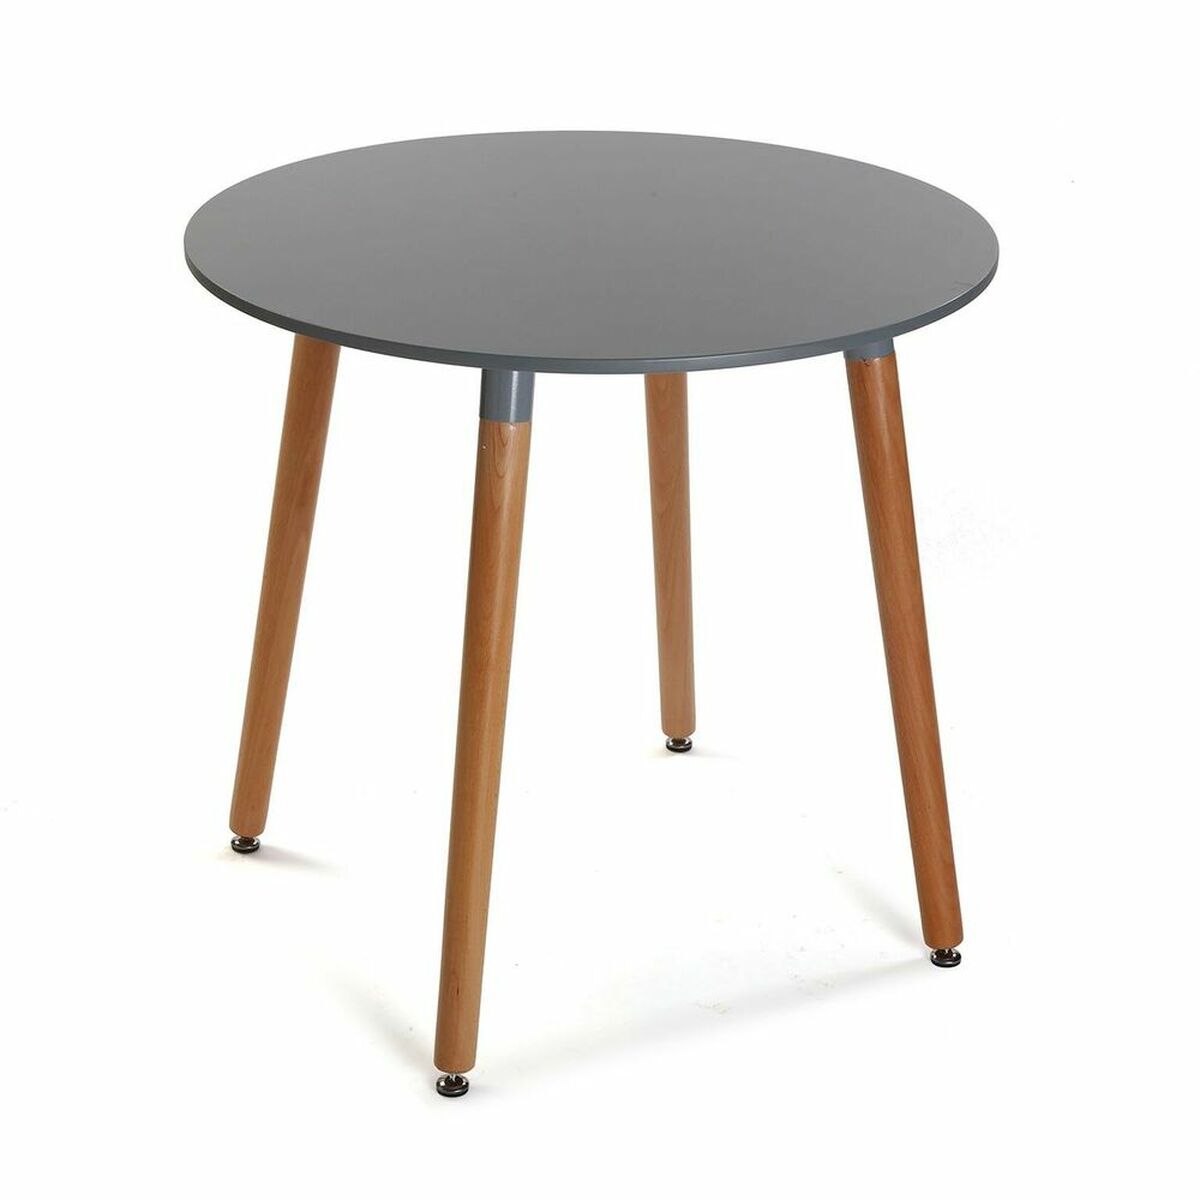 Table d'appoint Versa Mayra Gris Bois MDF (80 x 75 x 80 cm)